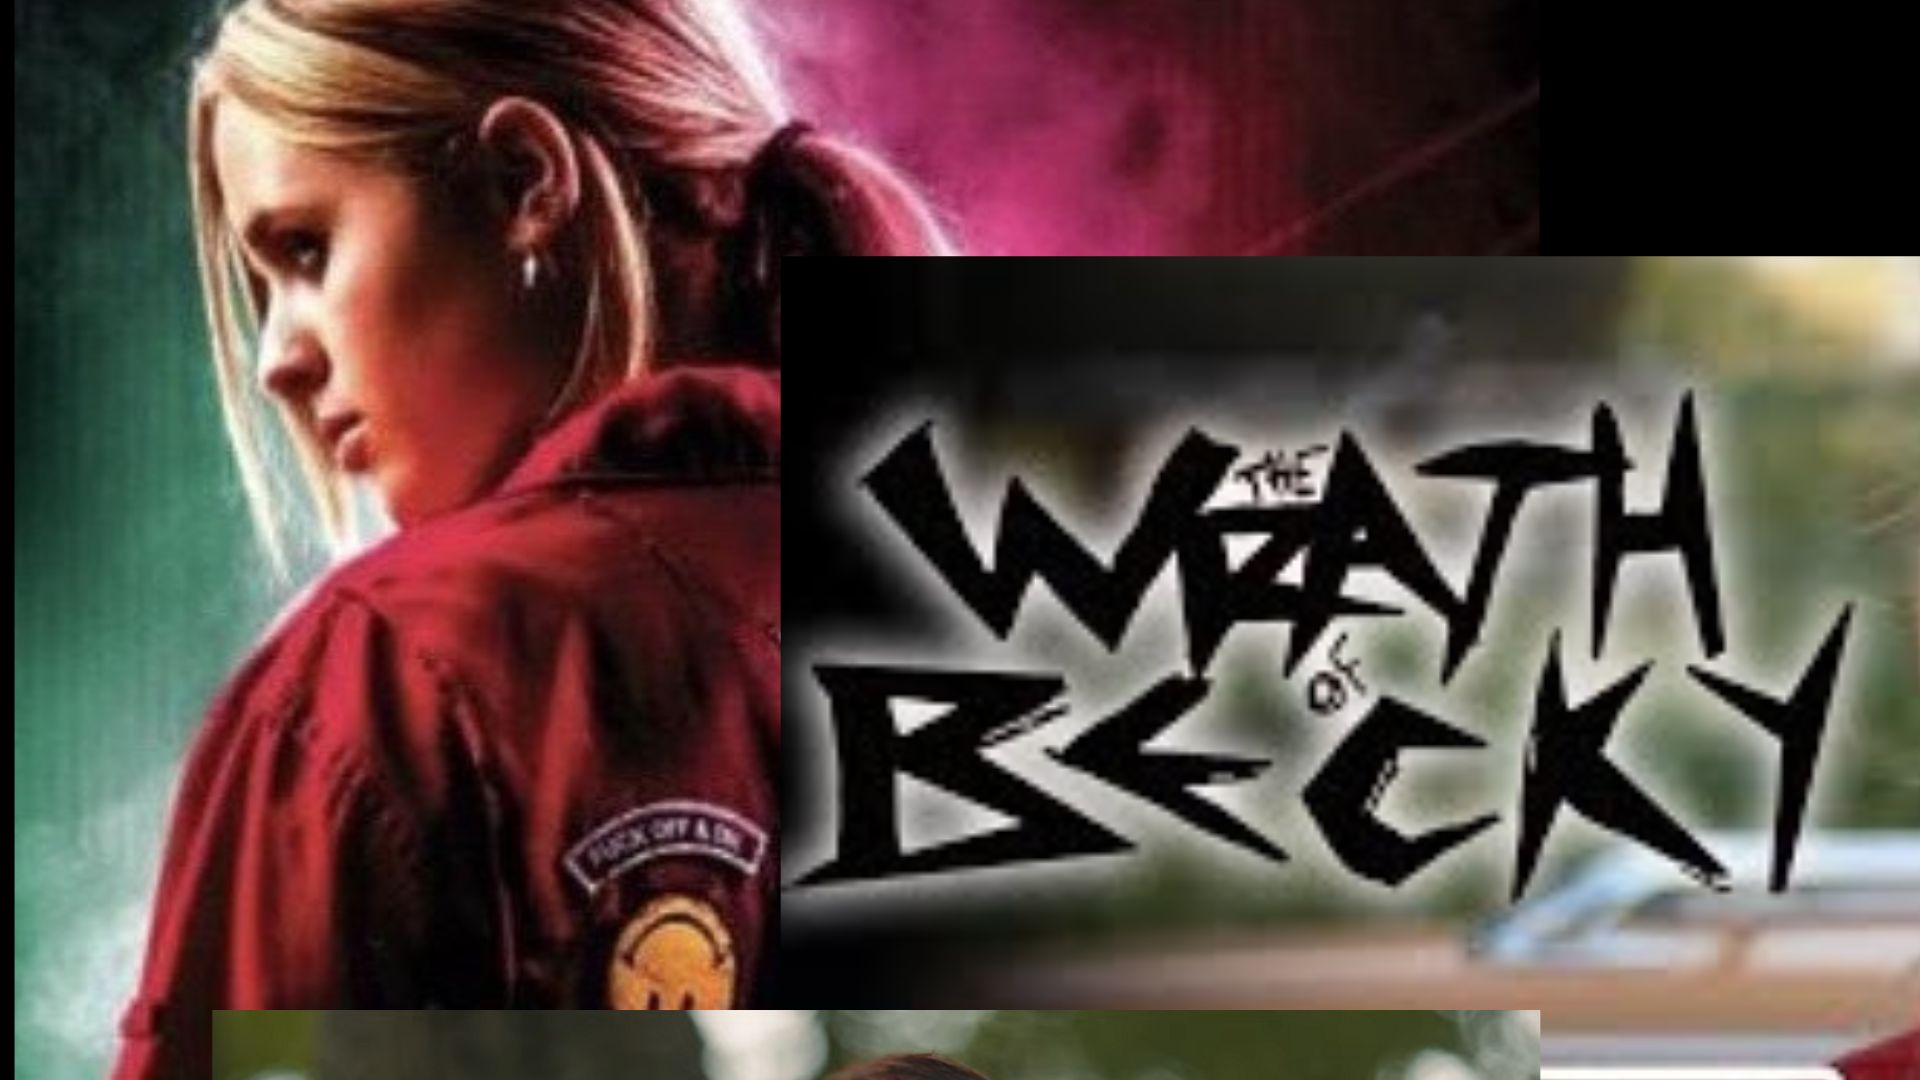 Wrath of Becky: The Horror Movie That Will Change Your Perception of Innocence